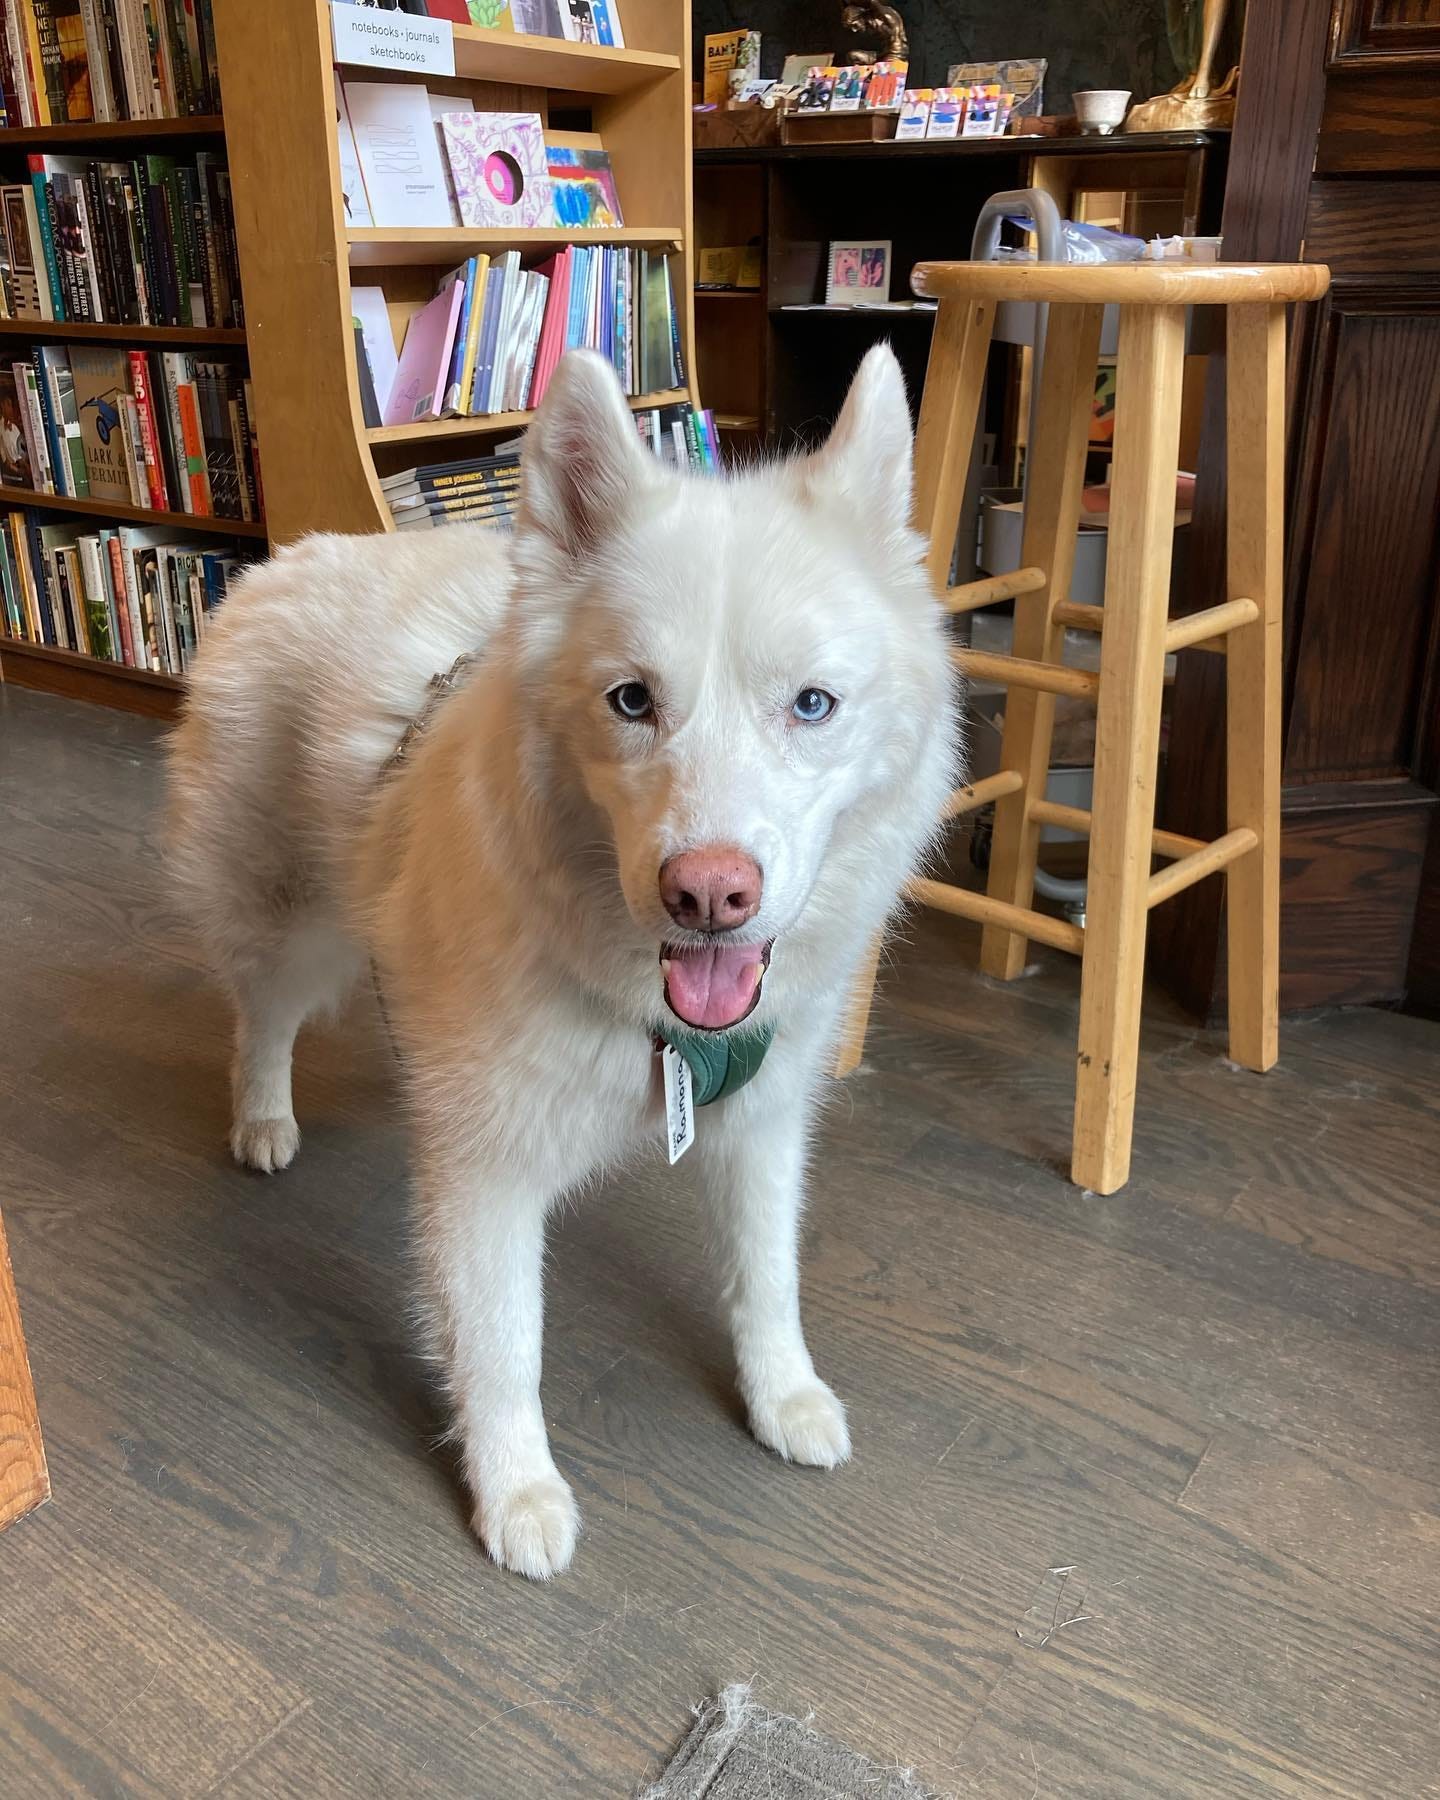 Ramona, a white husky with blue eyes, in front of bookshelves and a wooden stool